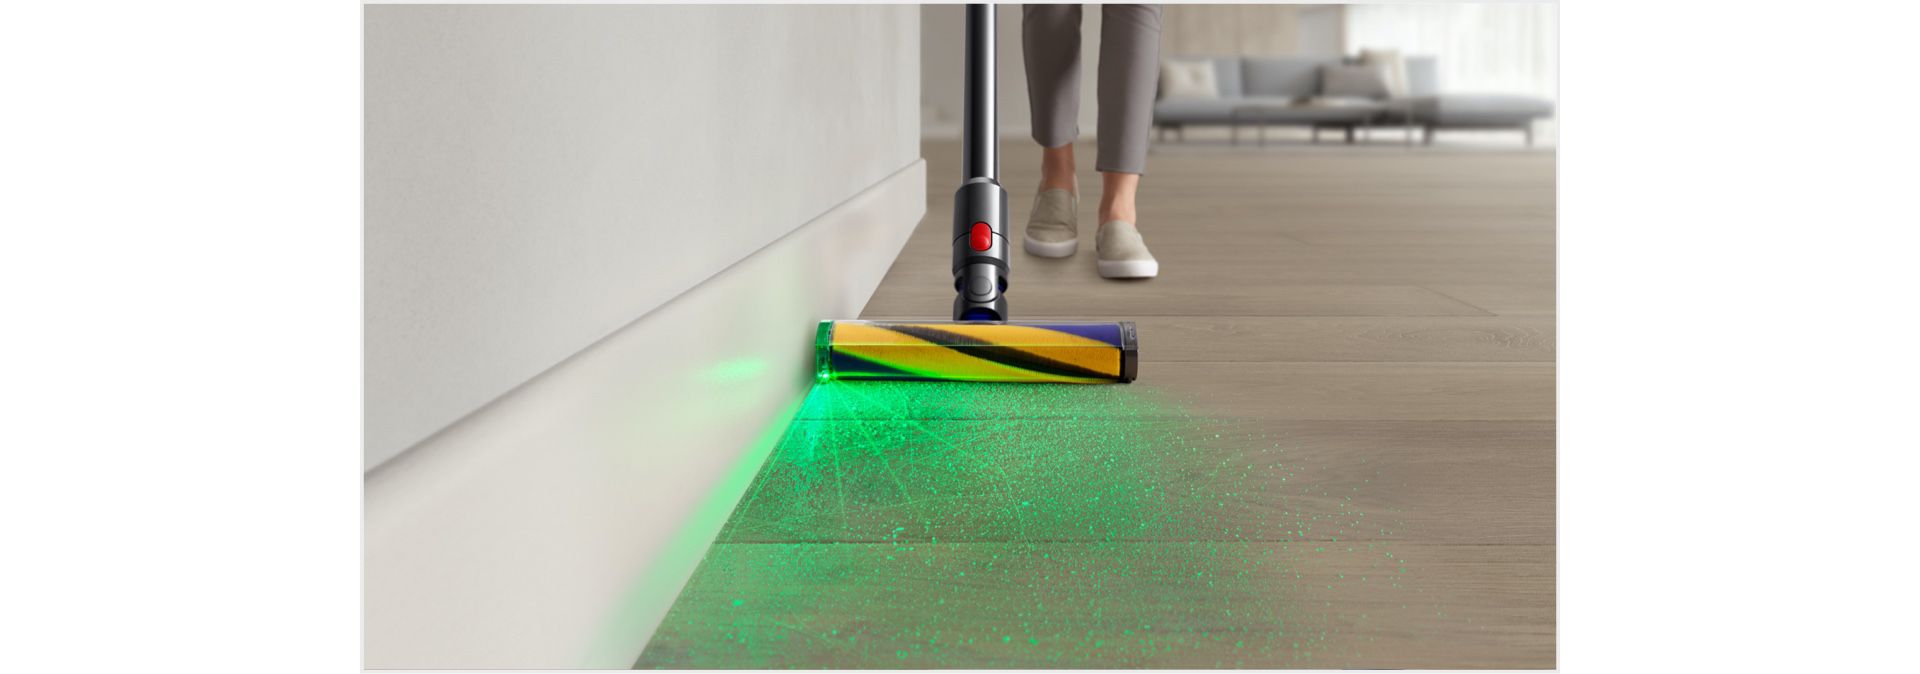 Dyson vacuum with Illuminated cleaner head being used to clean a hard floor.